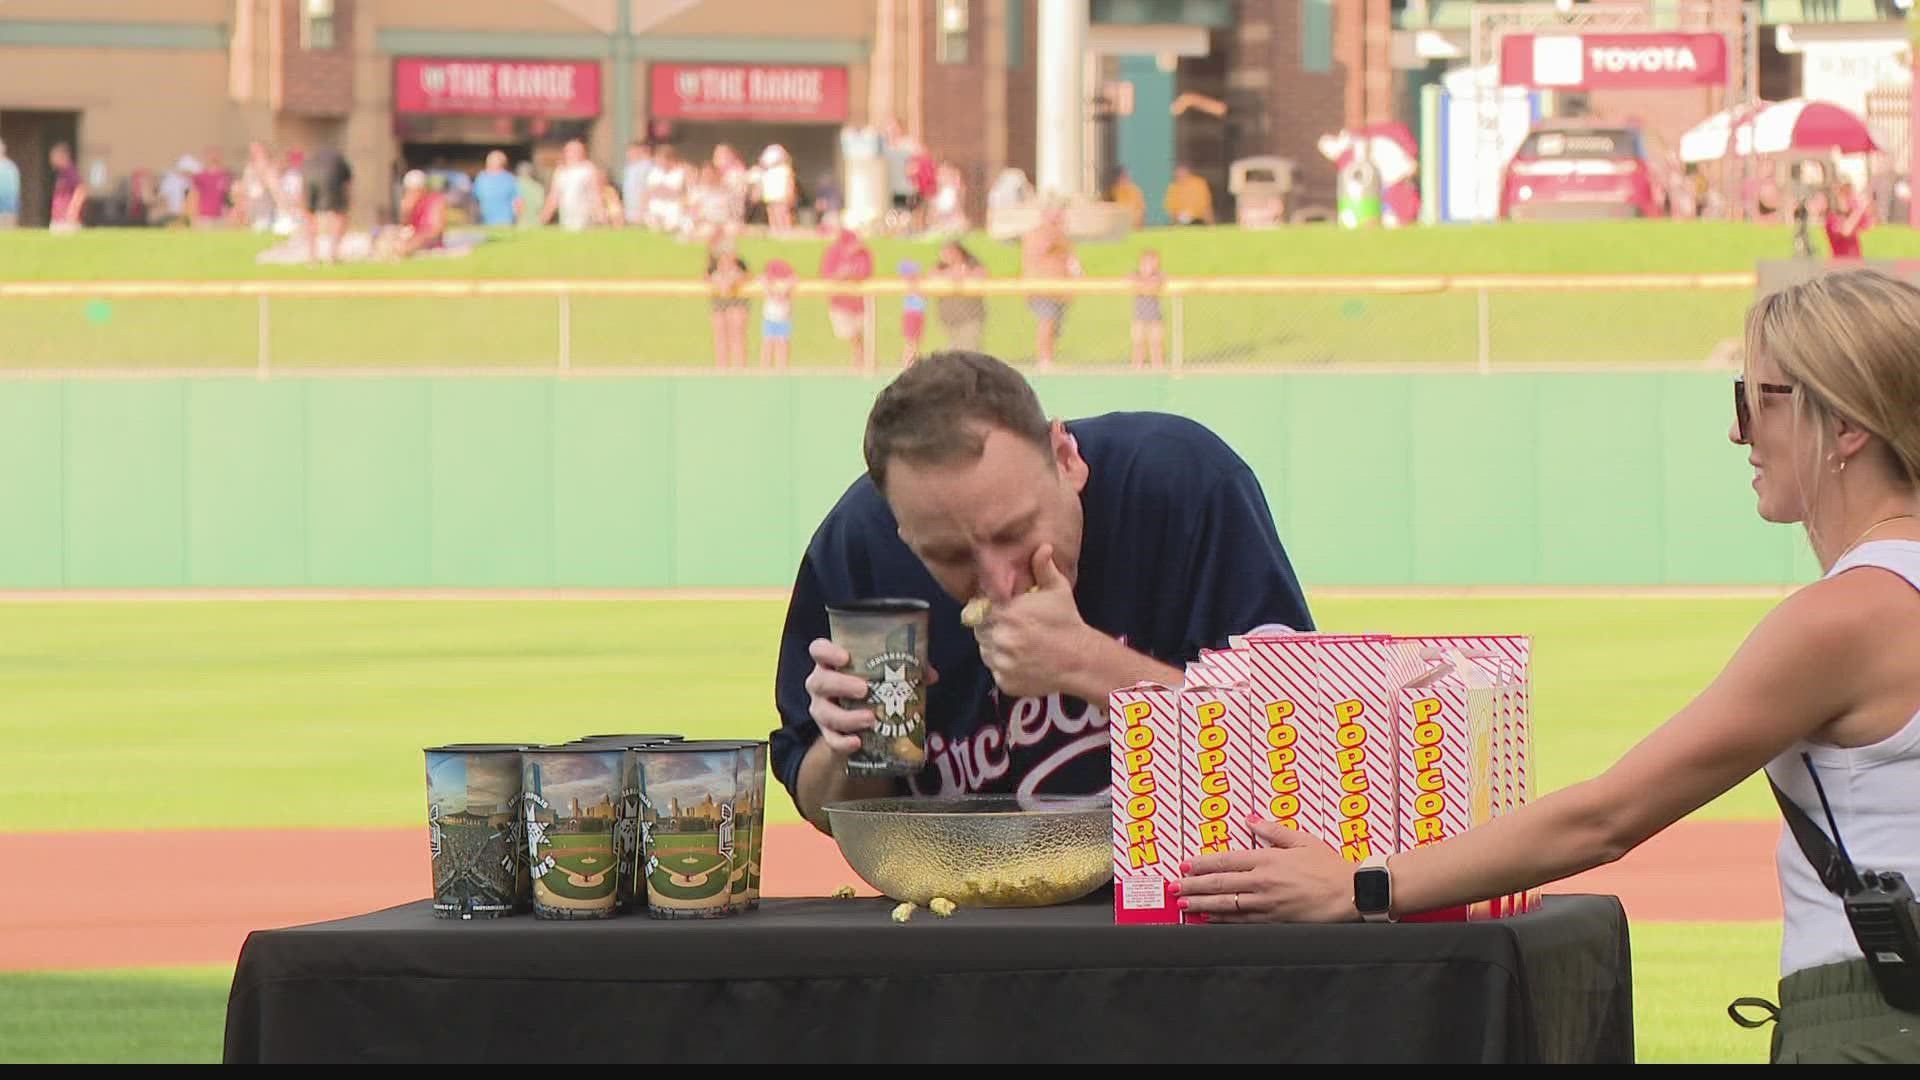 The world champion competitive eater took down Matt Stonie's record for the most popcorn eaten in eight minutes.